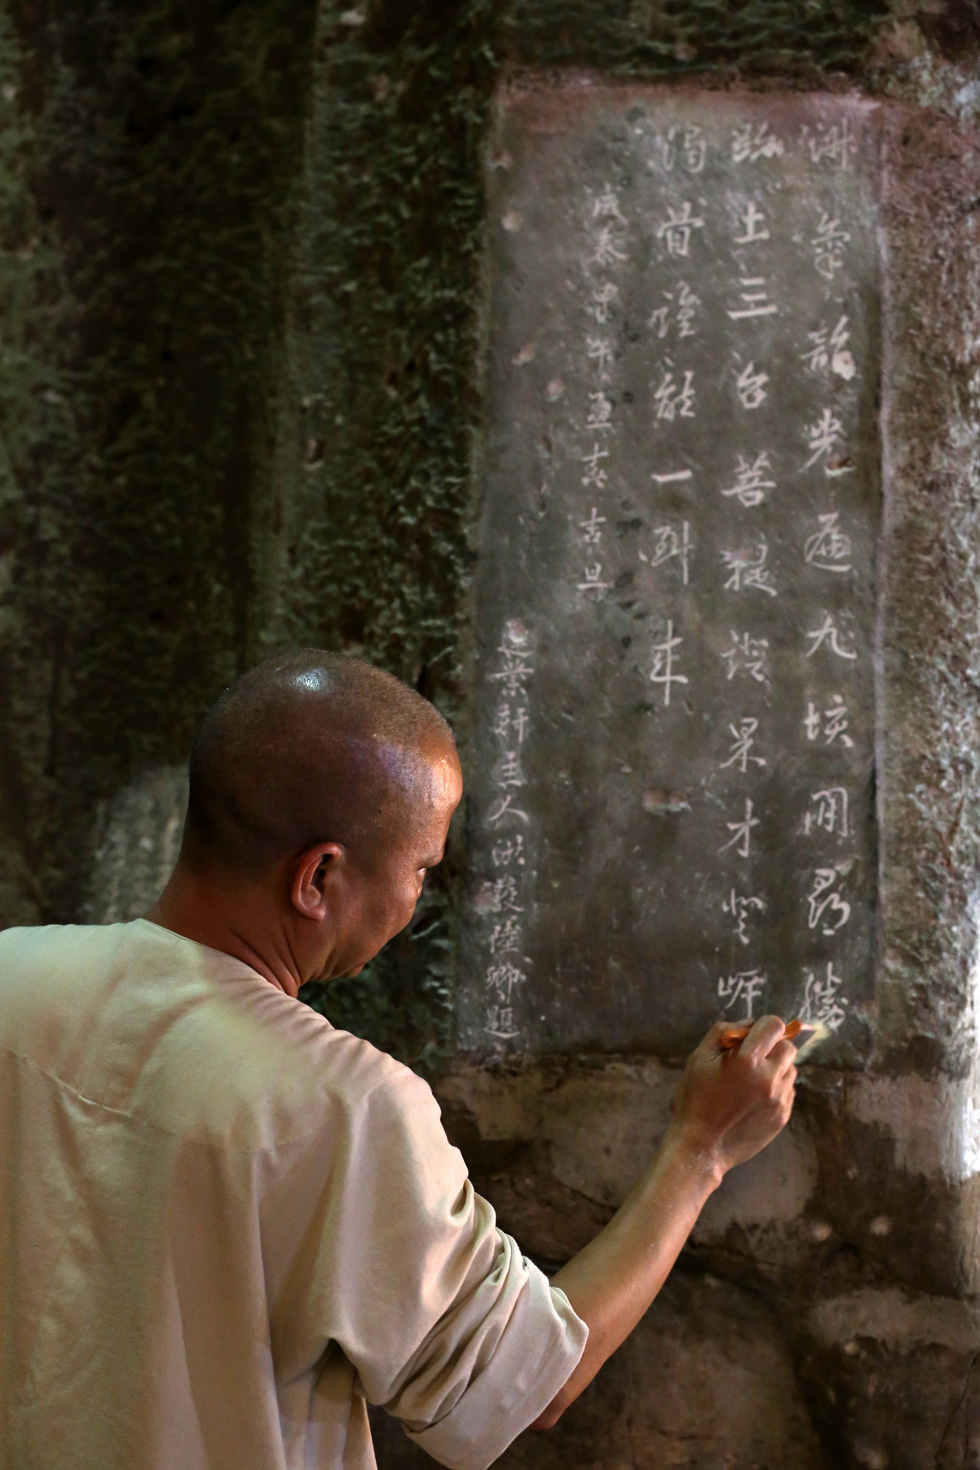 A researcher restore engravings at the Ngu Hanh Son Mountains in Da Nang. Photo: Nguyen Van Thinh / Tuoi Tre